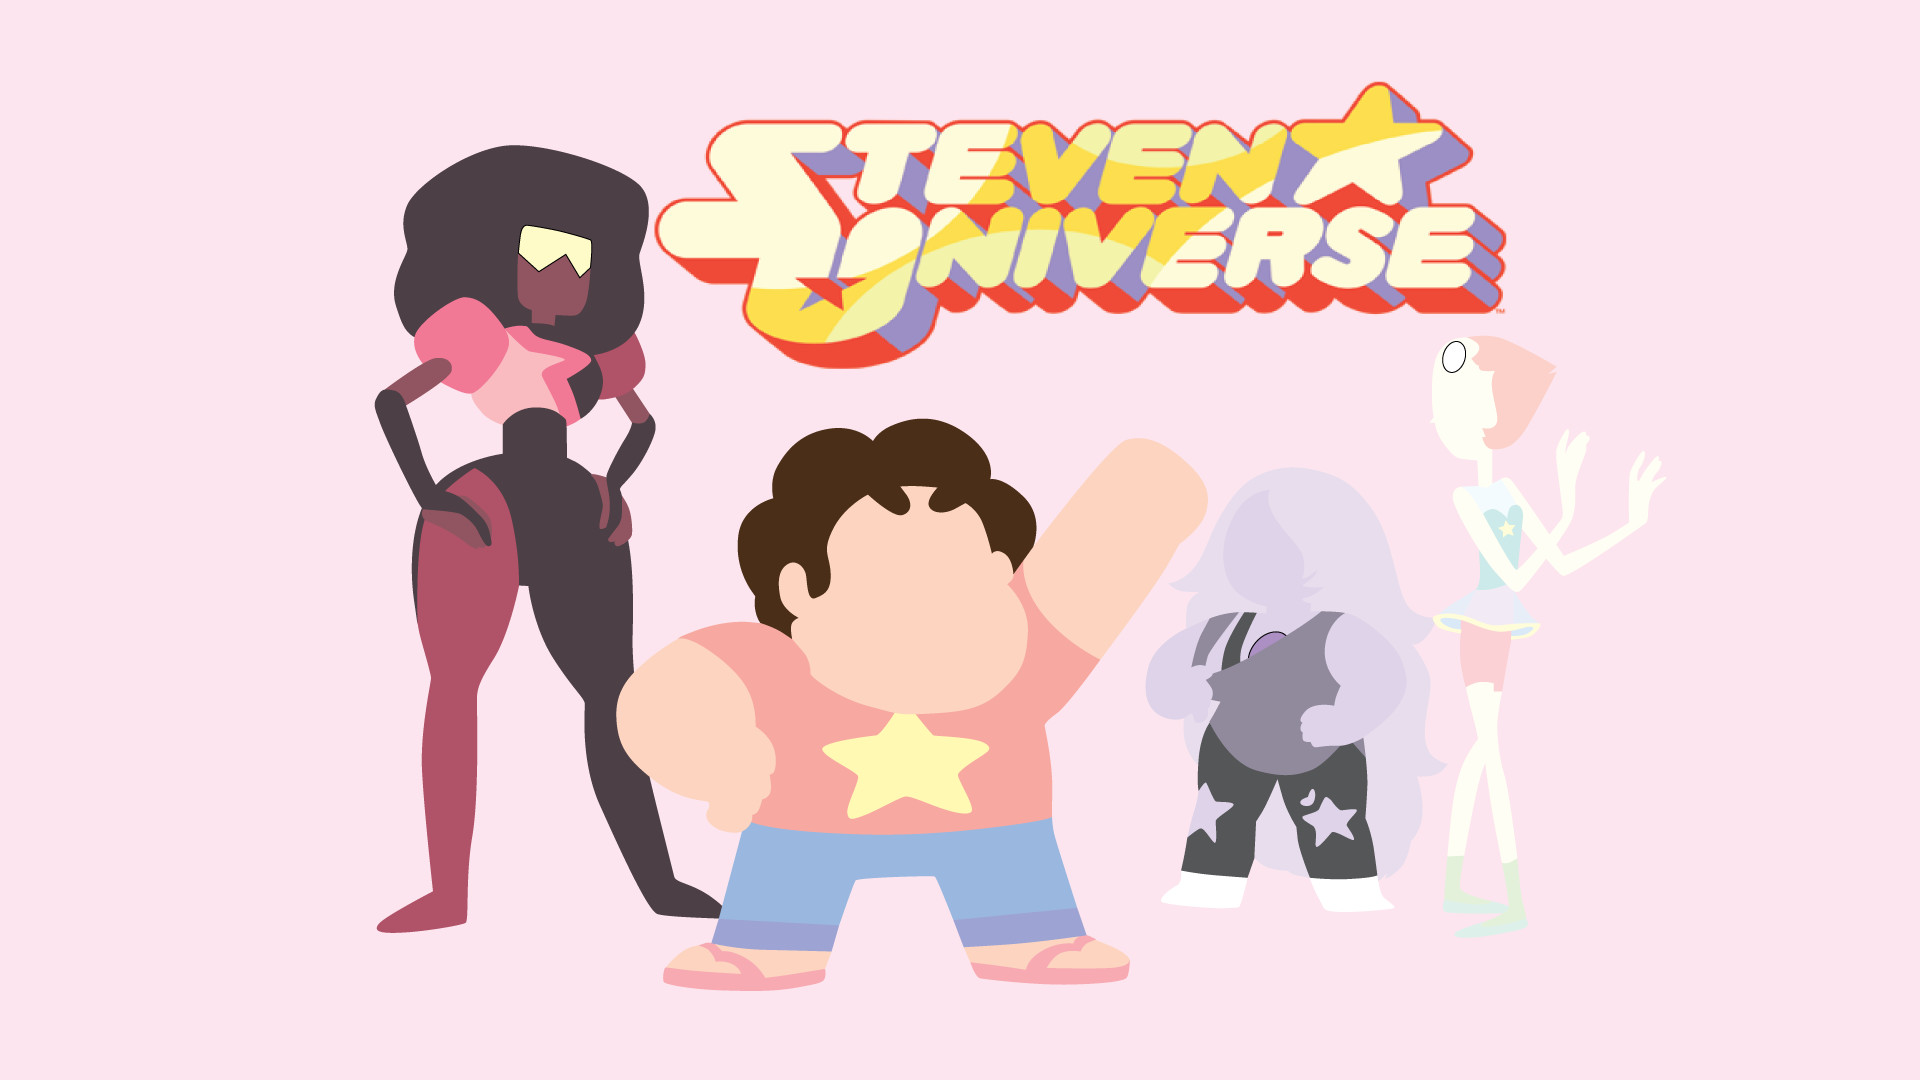 1920x1080 Steven Universe - The Crystal Gems by IllustratedIllusions on .